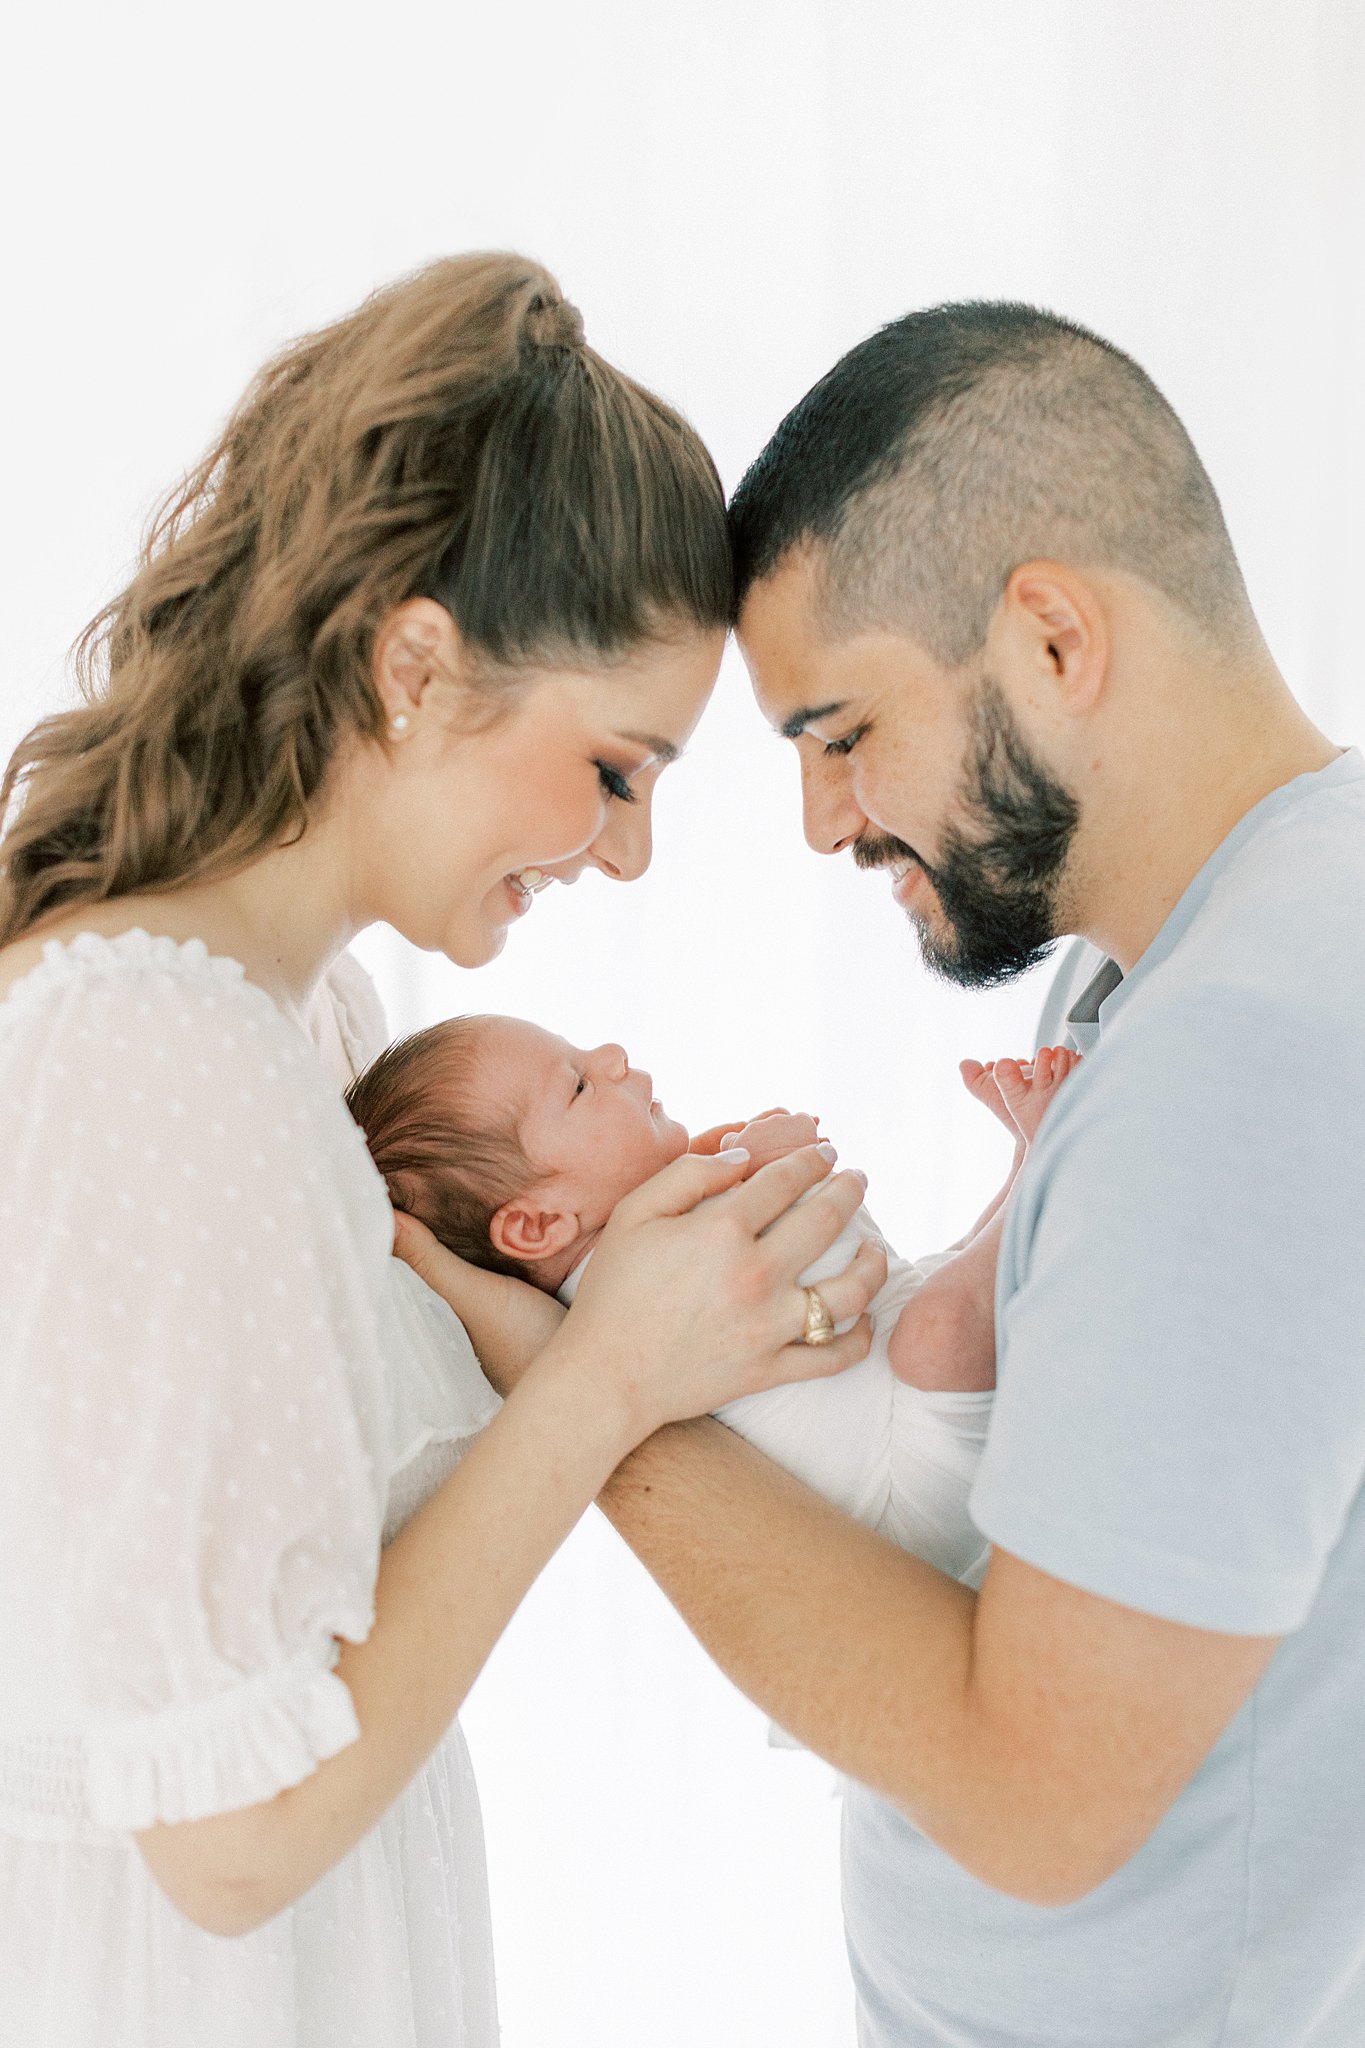 New parents smile down at their newborn baby while standing with foreheads together in front of a window